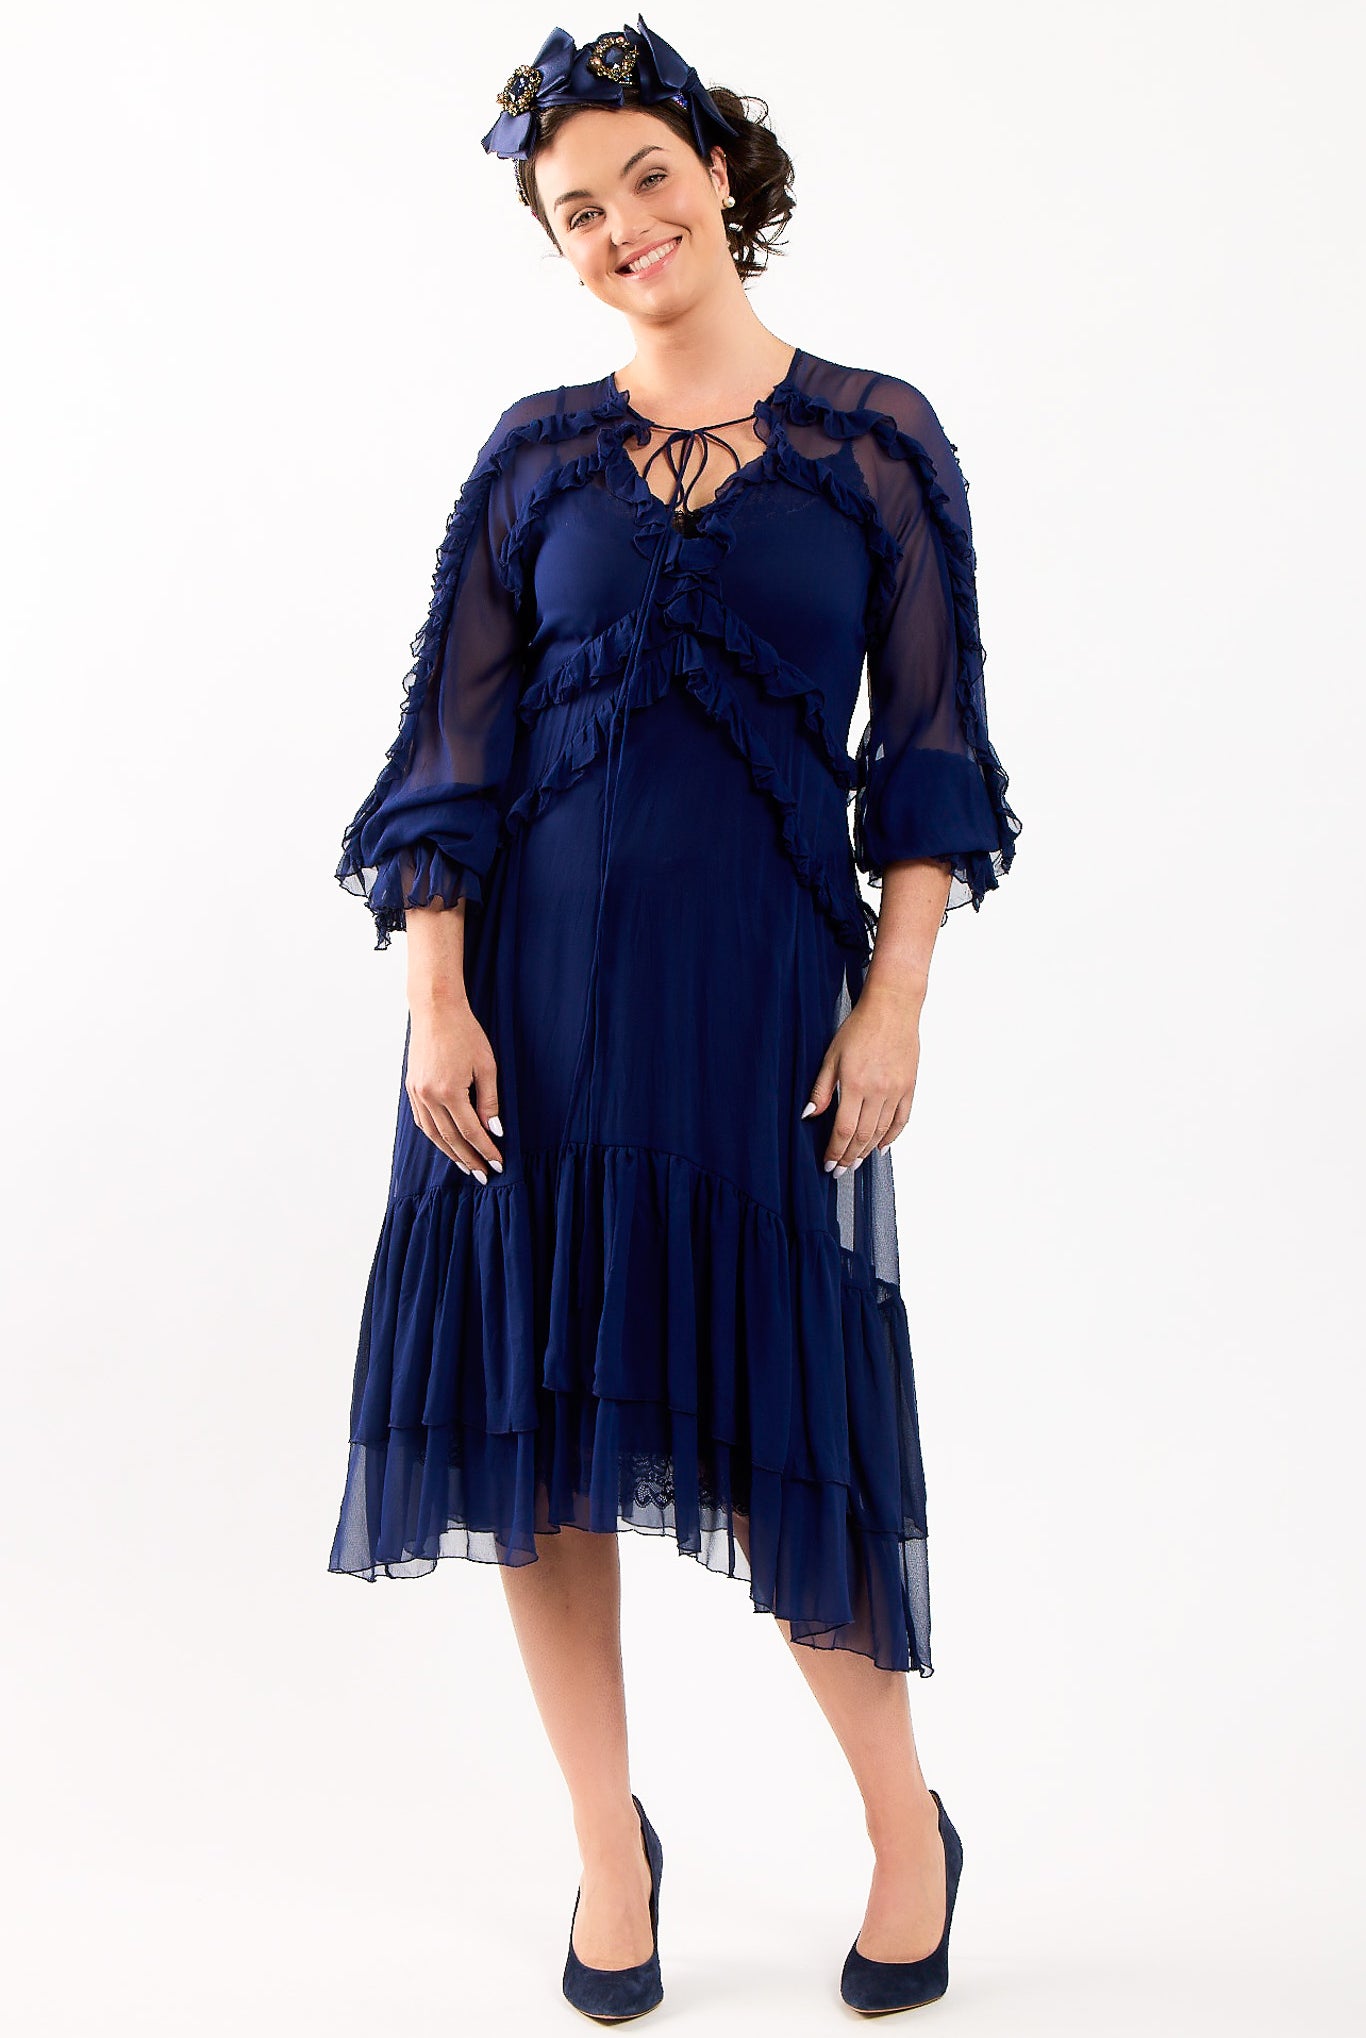 TRELISE COOPER Frill At Ease Dress - Navy - Magpie Style